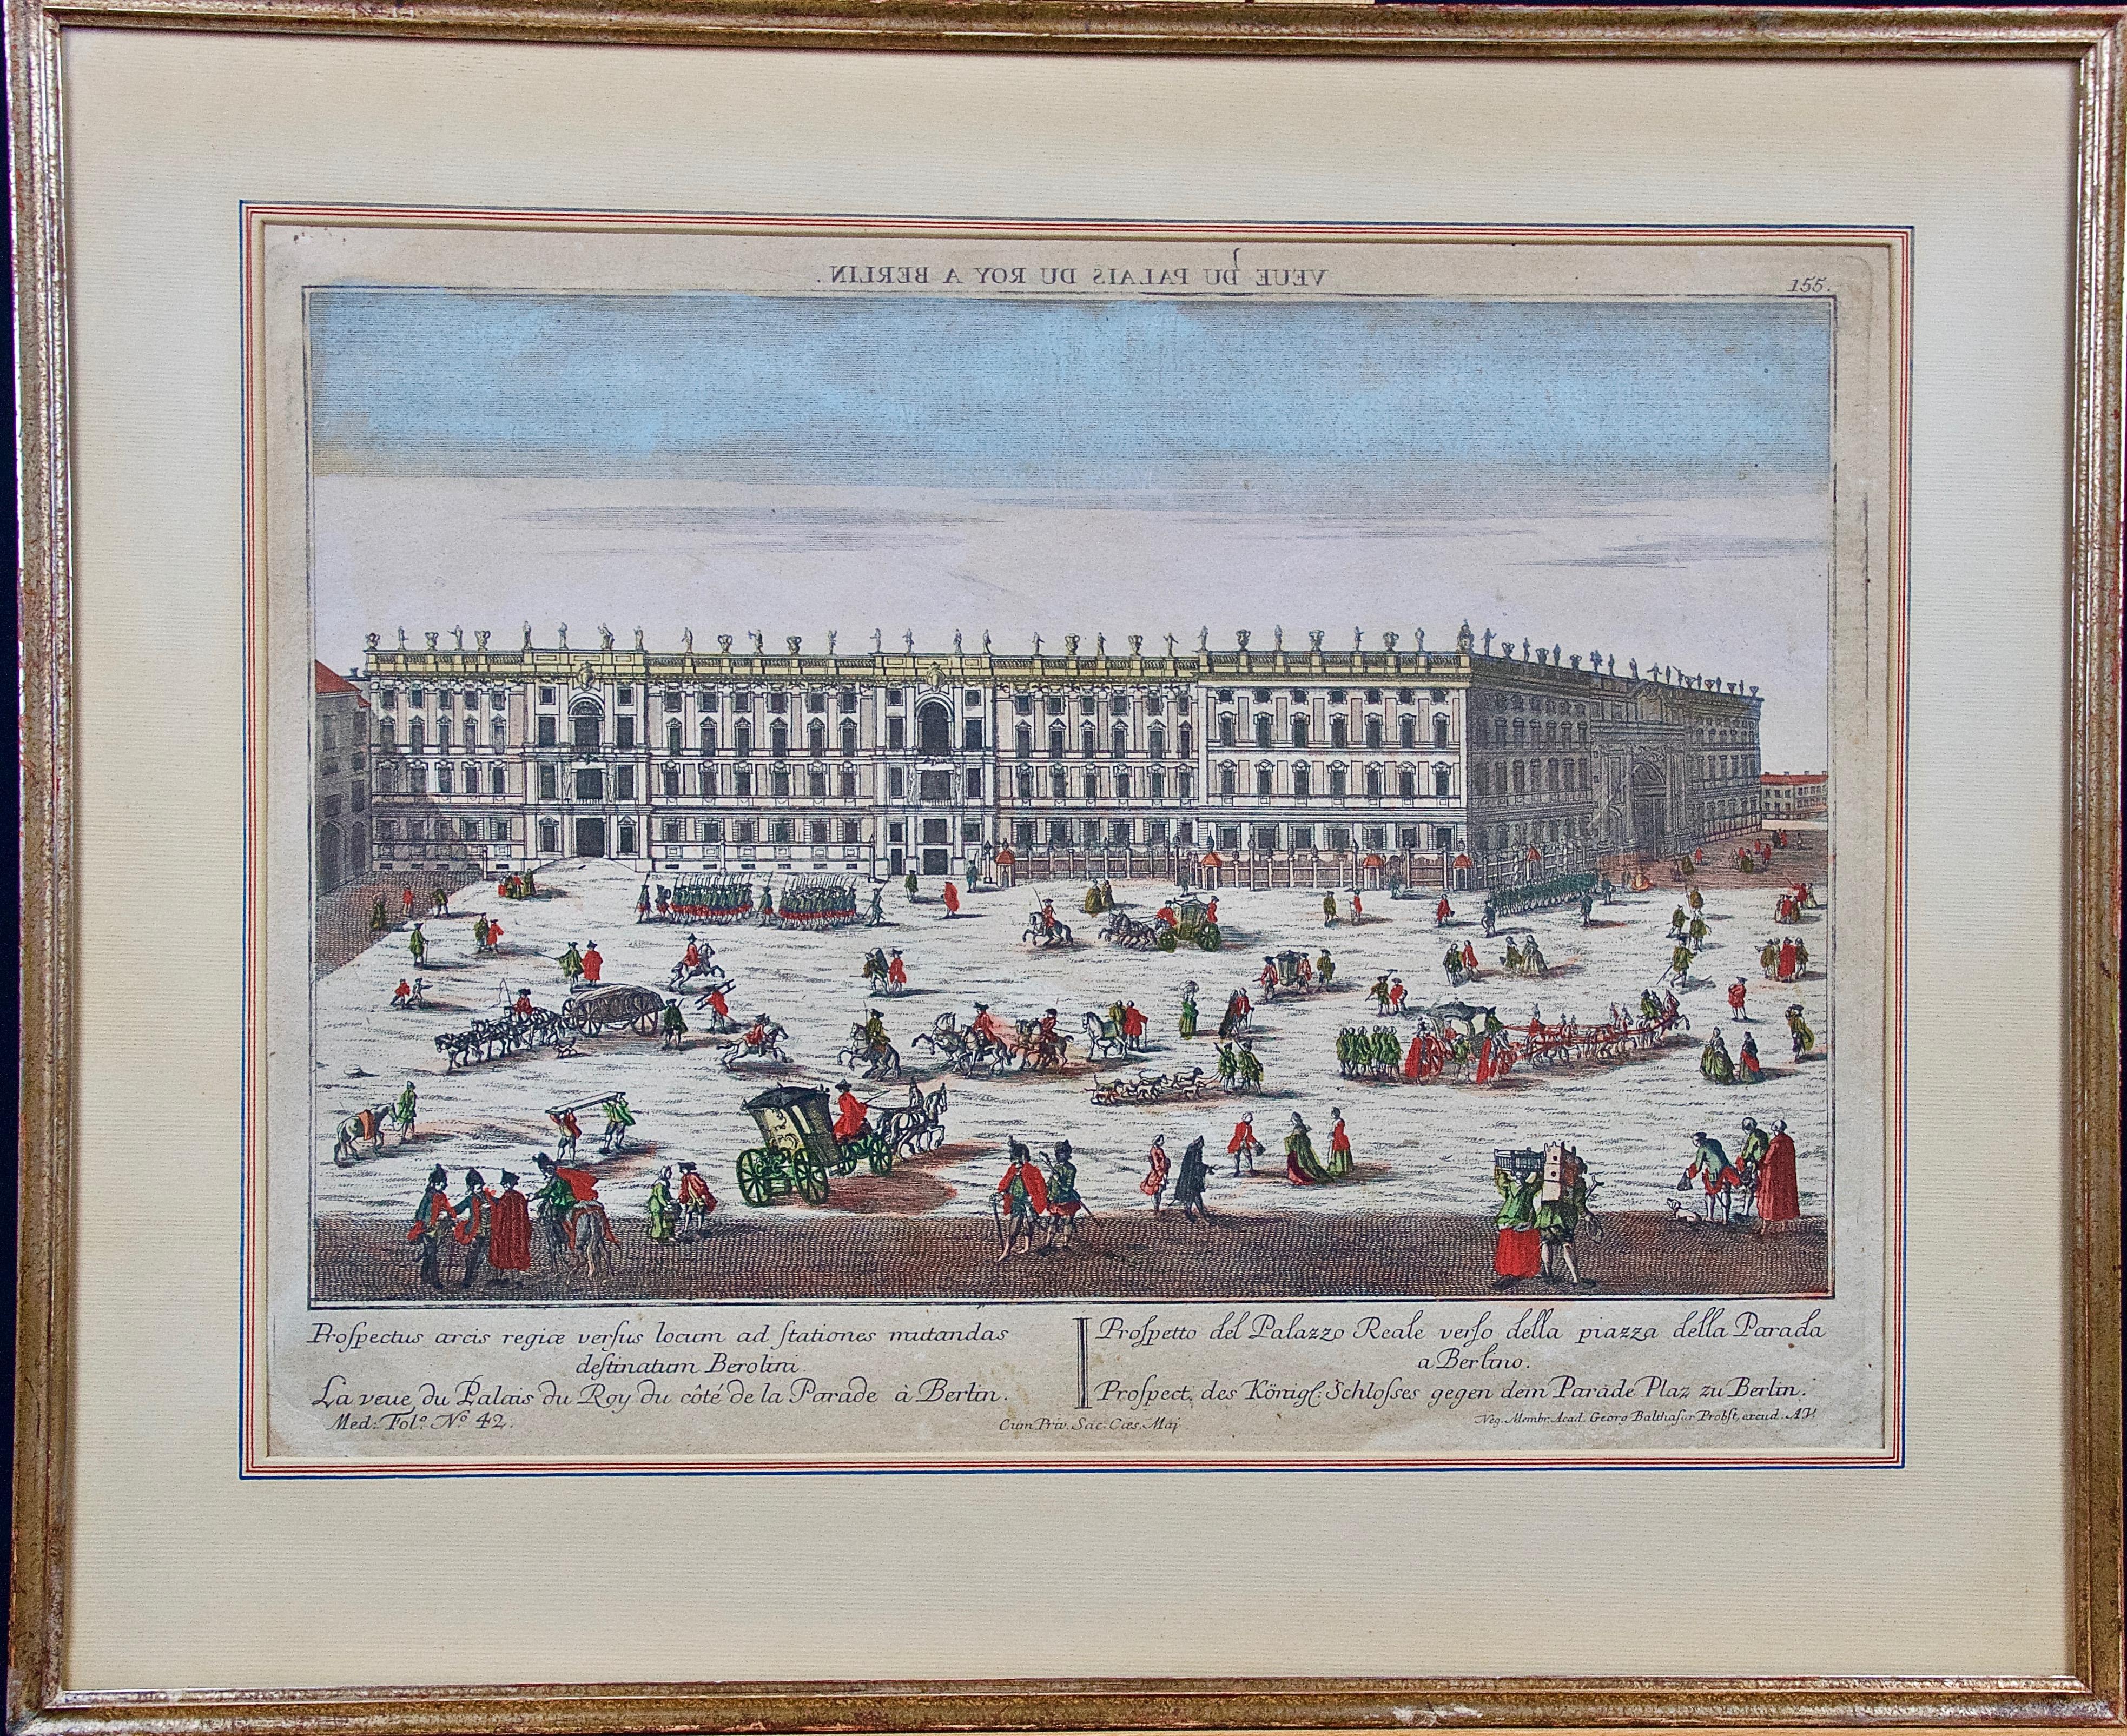 Georg Balthasar Probst Landscape Print - A Hand Colored Probst Vue d’optique Engraving of the Royal Palace in Berlin 